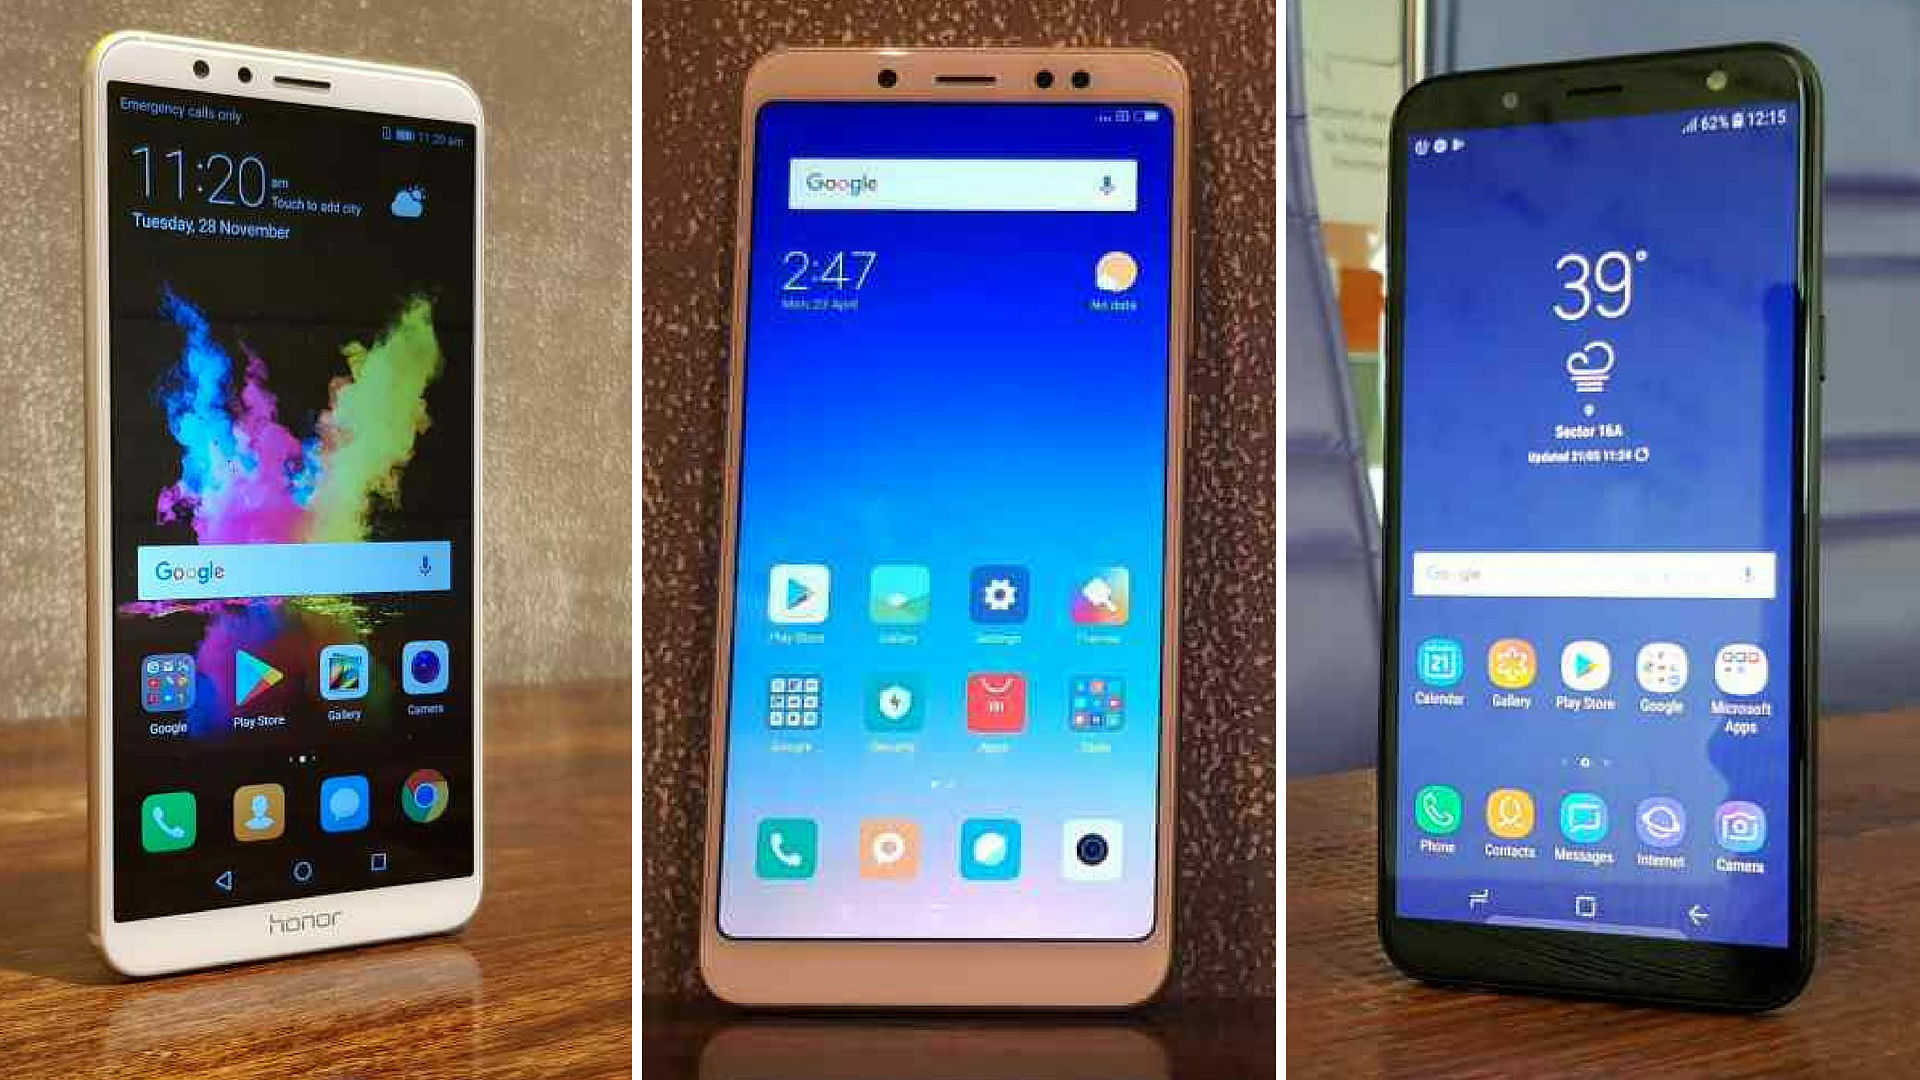 Honor 7x(left), Redmi note 5 Pro (middle), Samsung J6 (right).